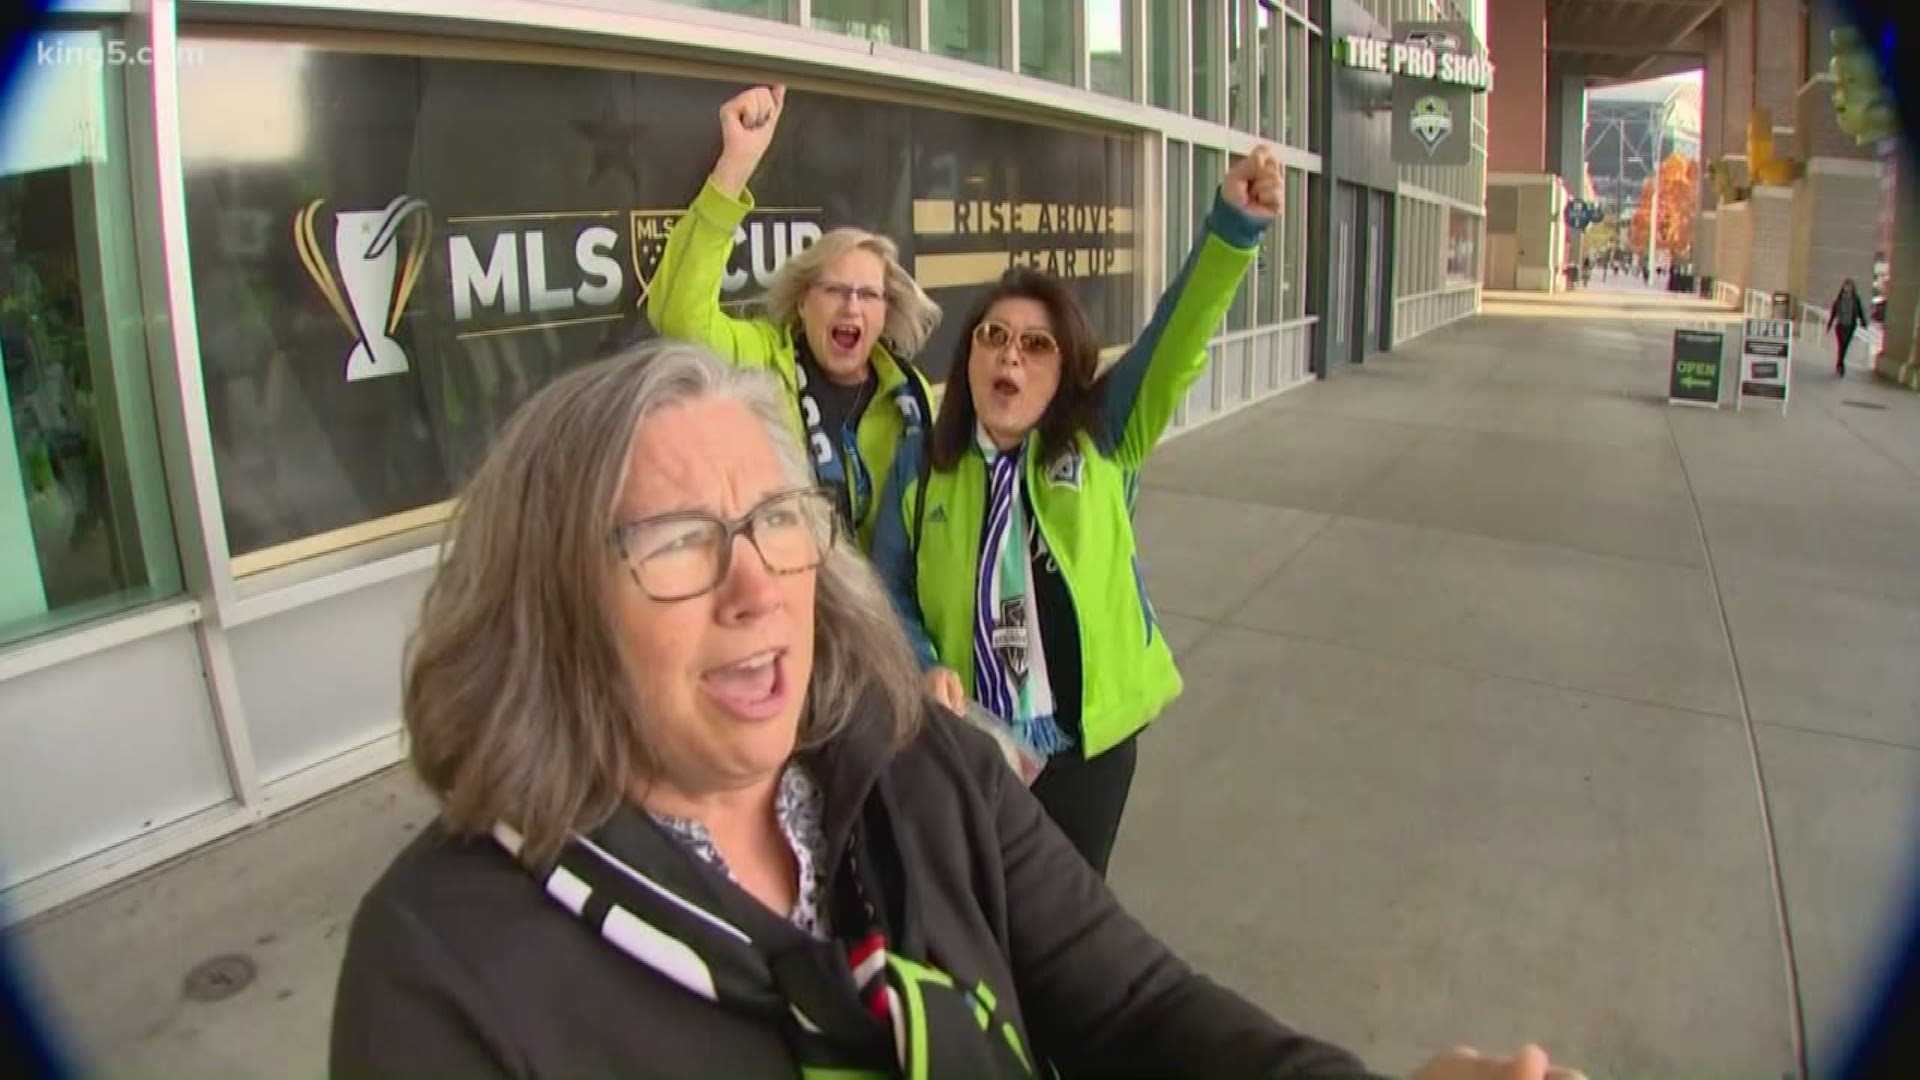 Tens of thousands of spectators are expected to flood Century Link for a Sounders field side face off